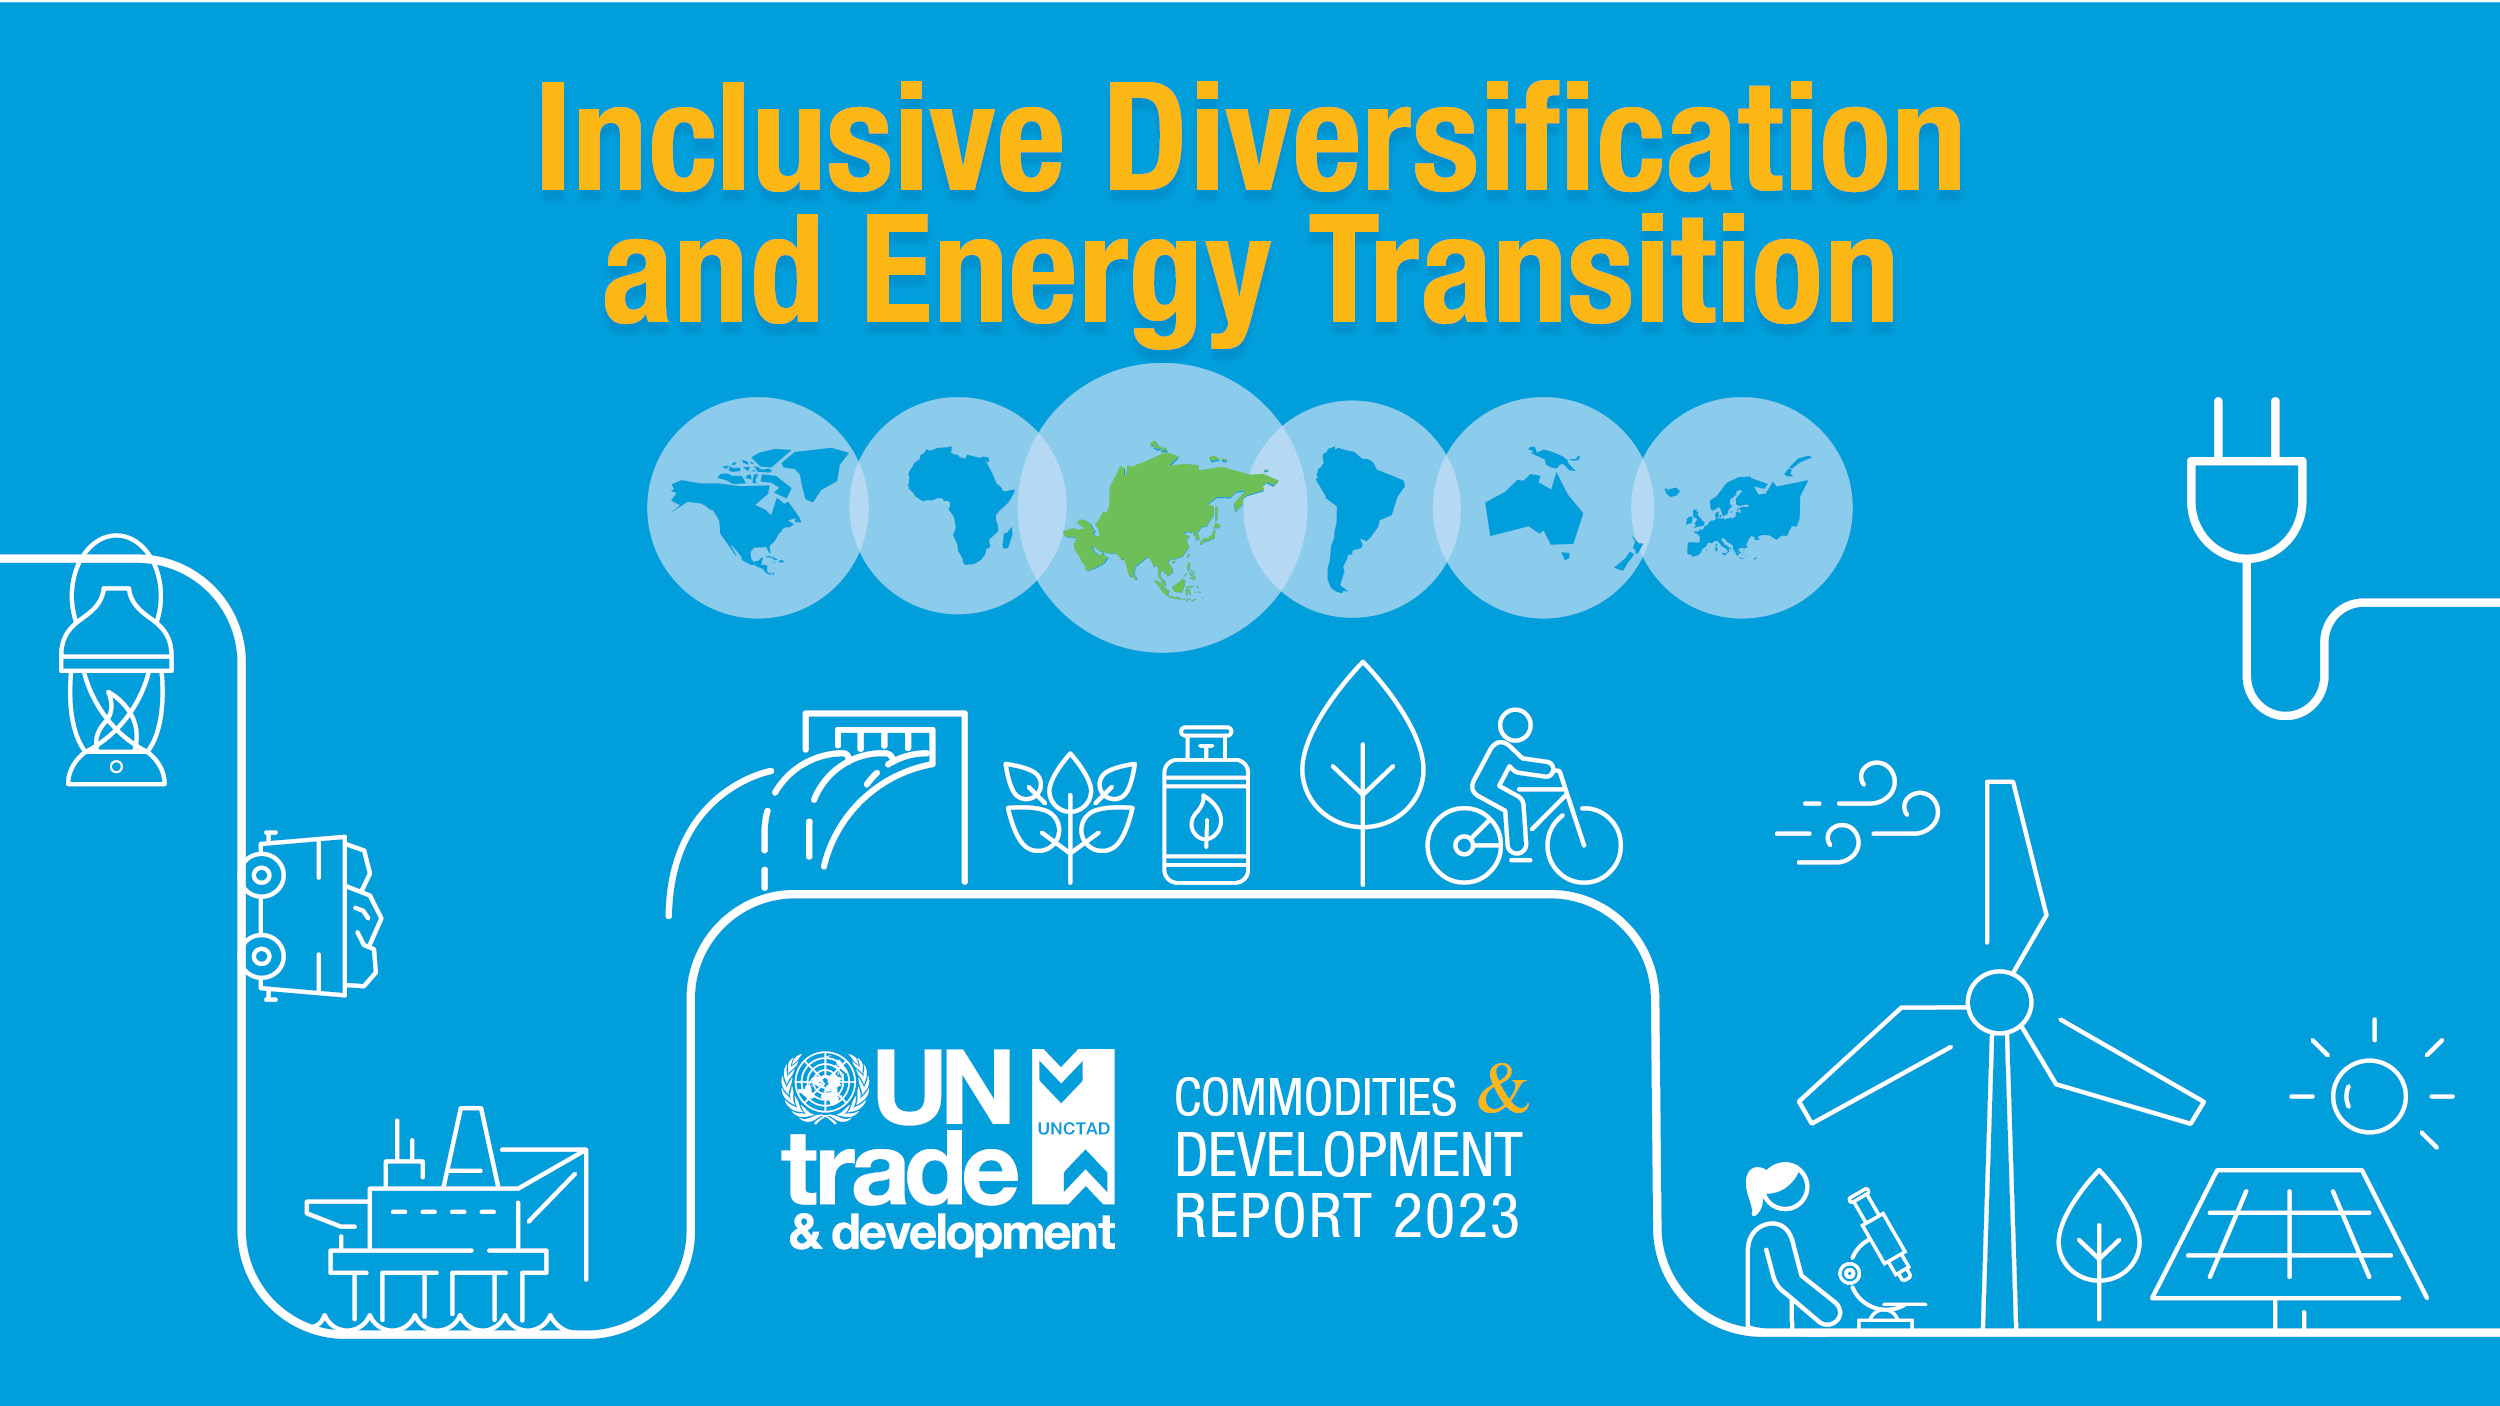 Webinar on inclusive diversification and energy transition